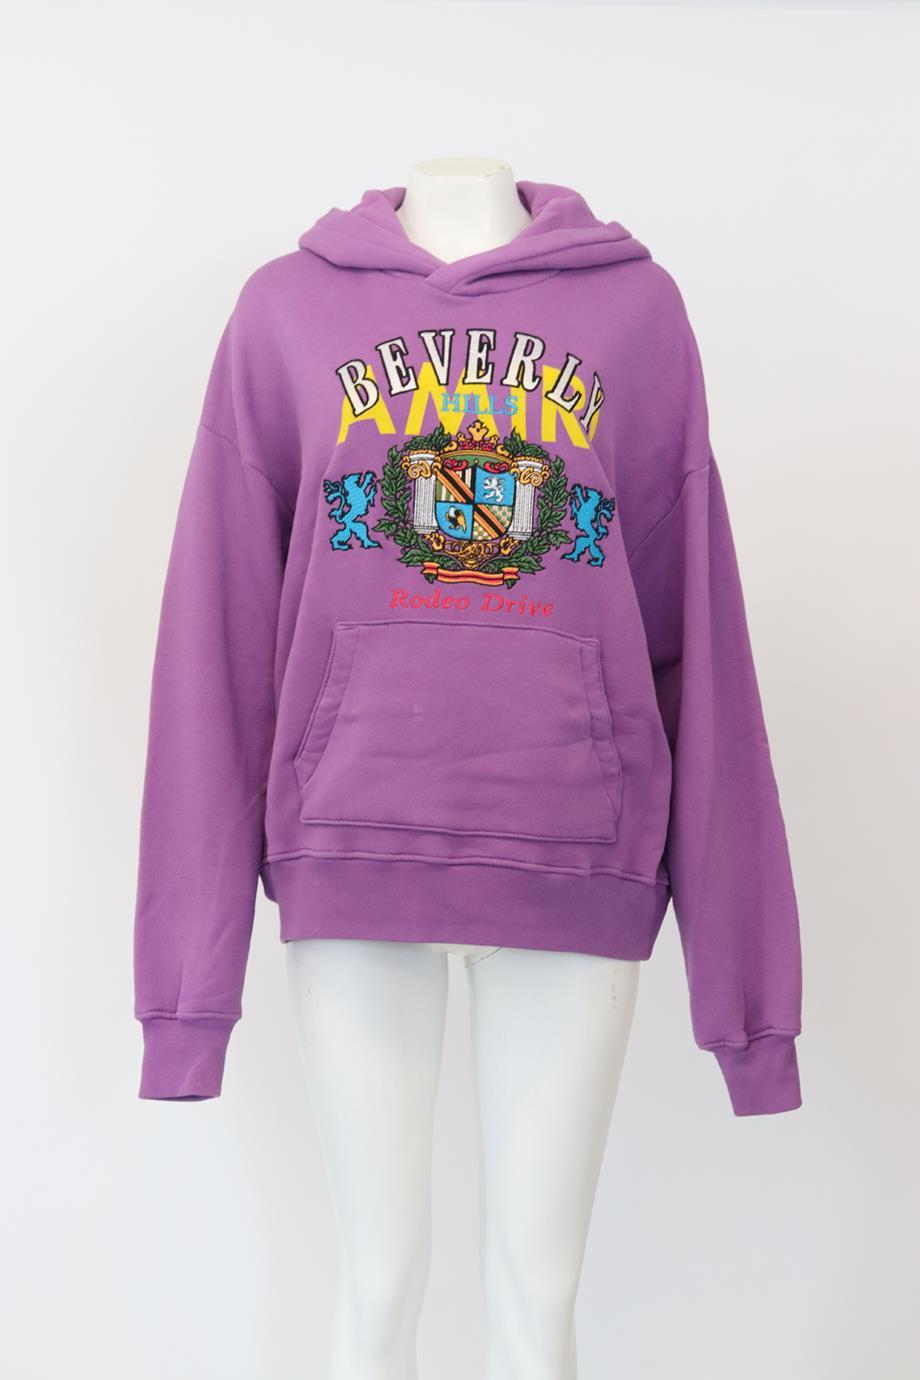 Amiri Embroidered Cotton Jersey Hoodie. Purple. Long Sleeve. Crewneck. Slips on. 100% Cotton. Medium (UK 10, US 6, FR 38, IT 42). Bust: 55.6 in. Waist: 53.2 in. Hips: 44.4 in. Length: 24.1 in. Condition: Used. Very good condition - Light signs of